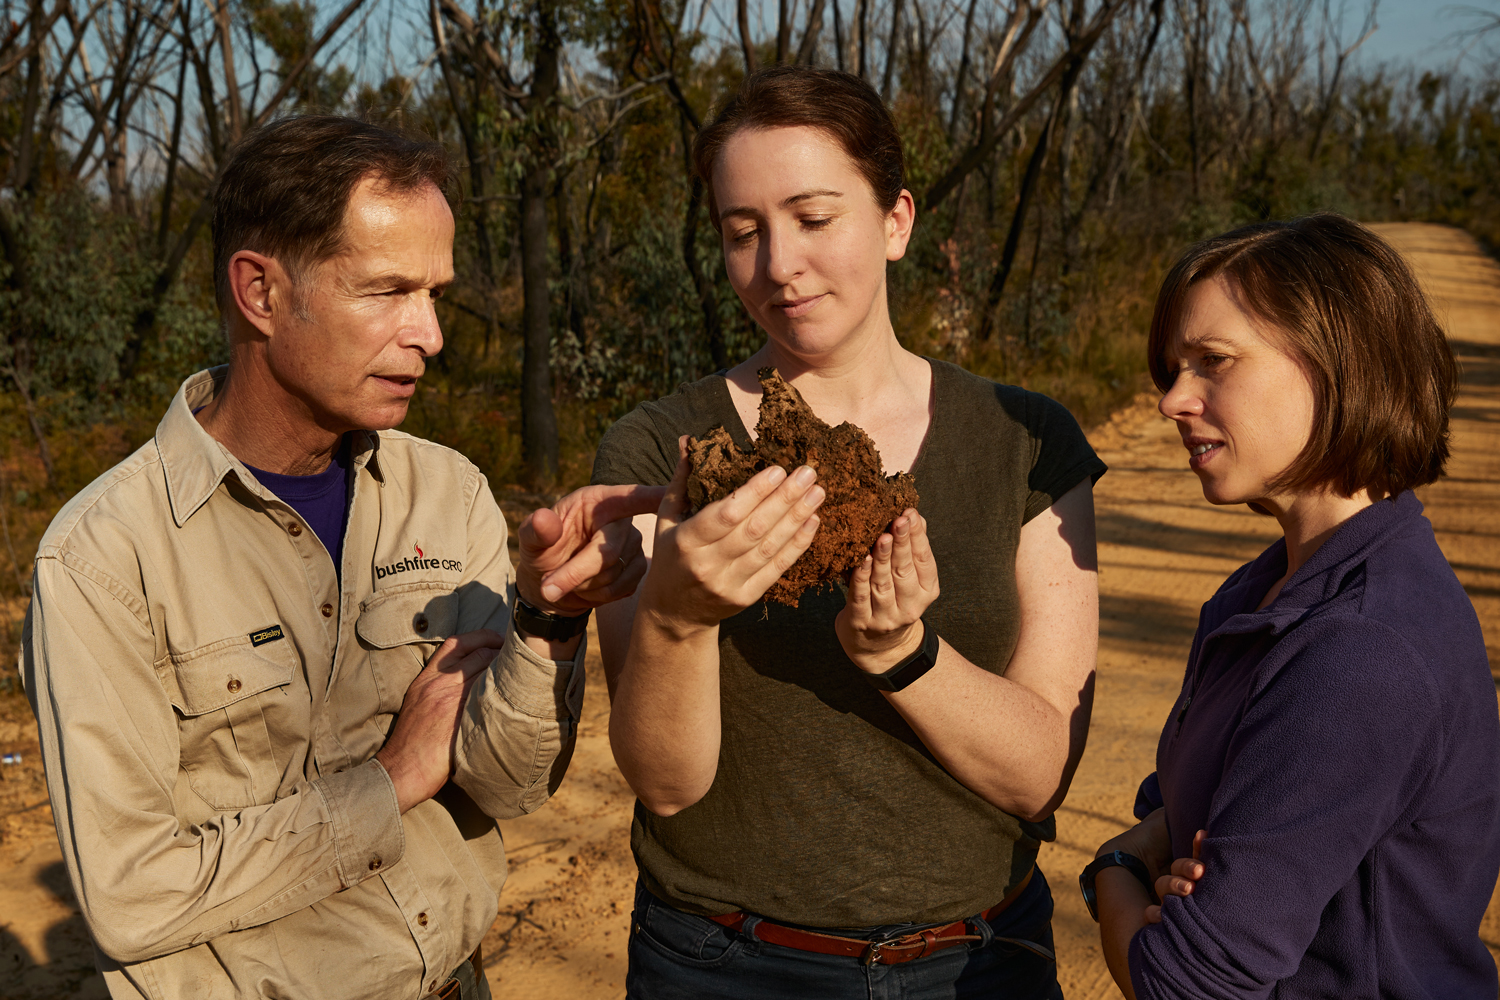 Members of Western’s Fire Research Group: Matthias Boer, Rachael Nolan, and Anne Griebel.